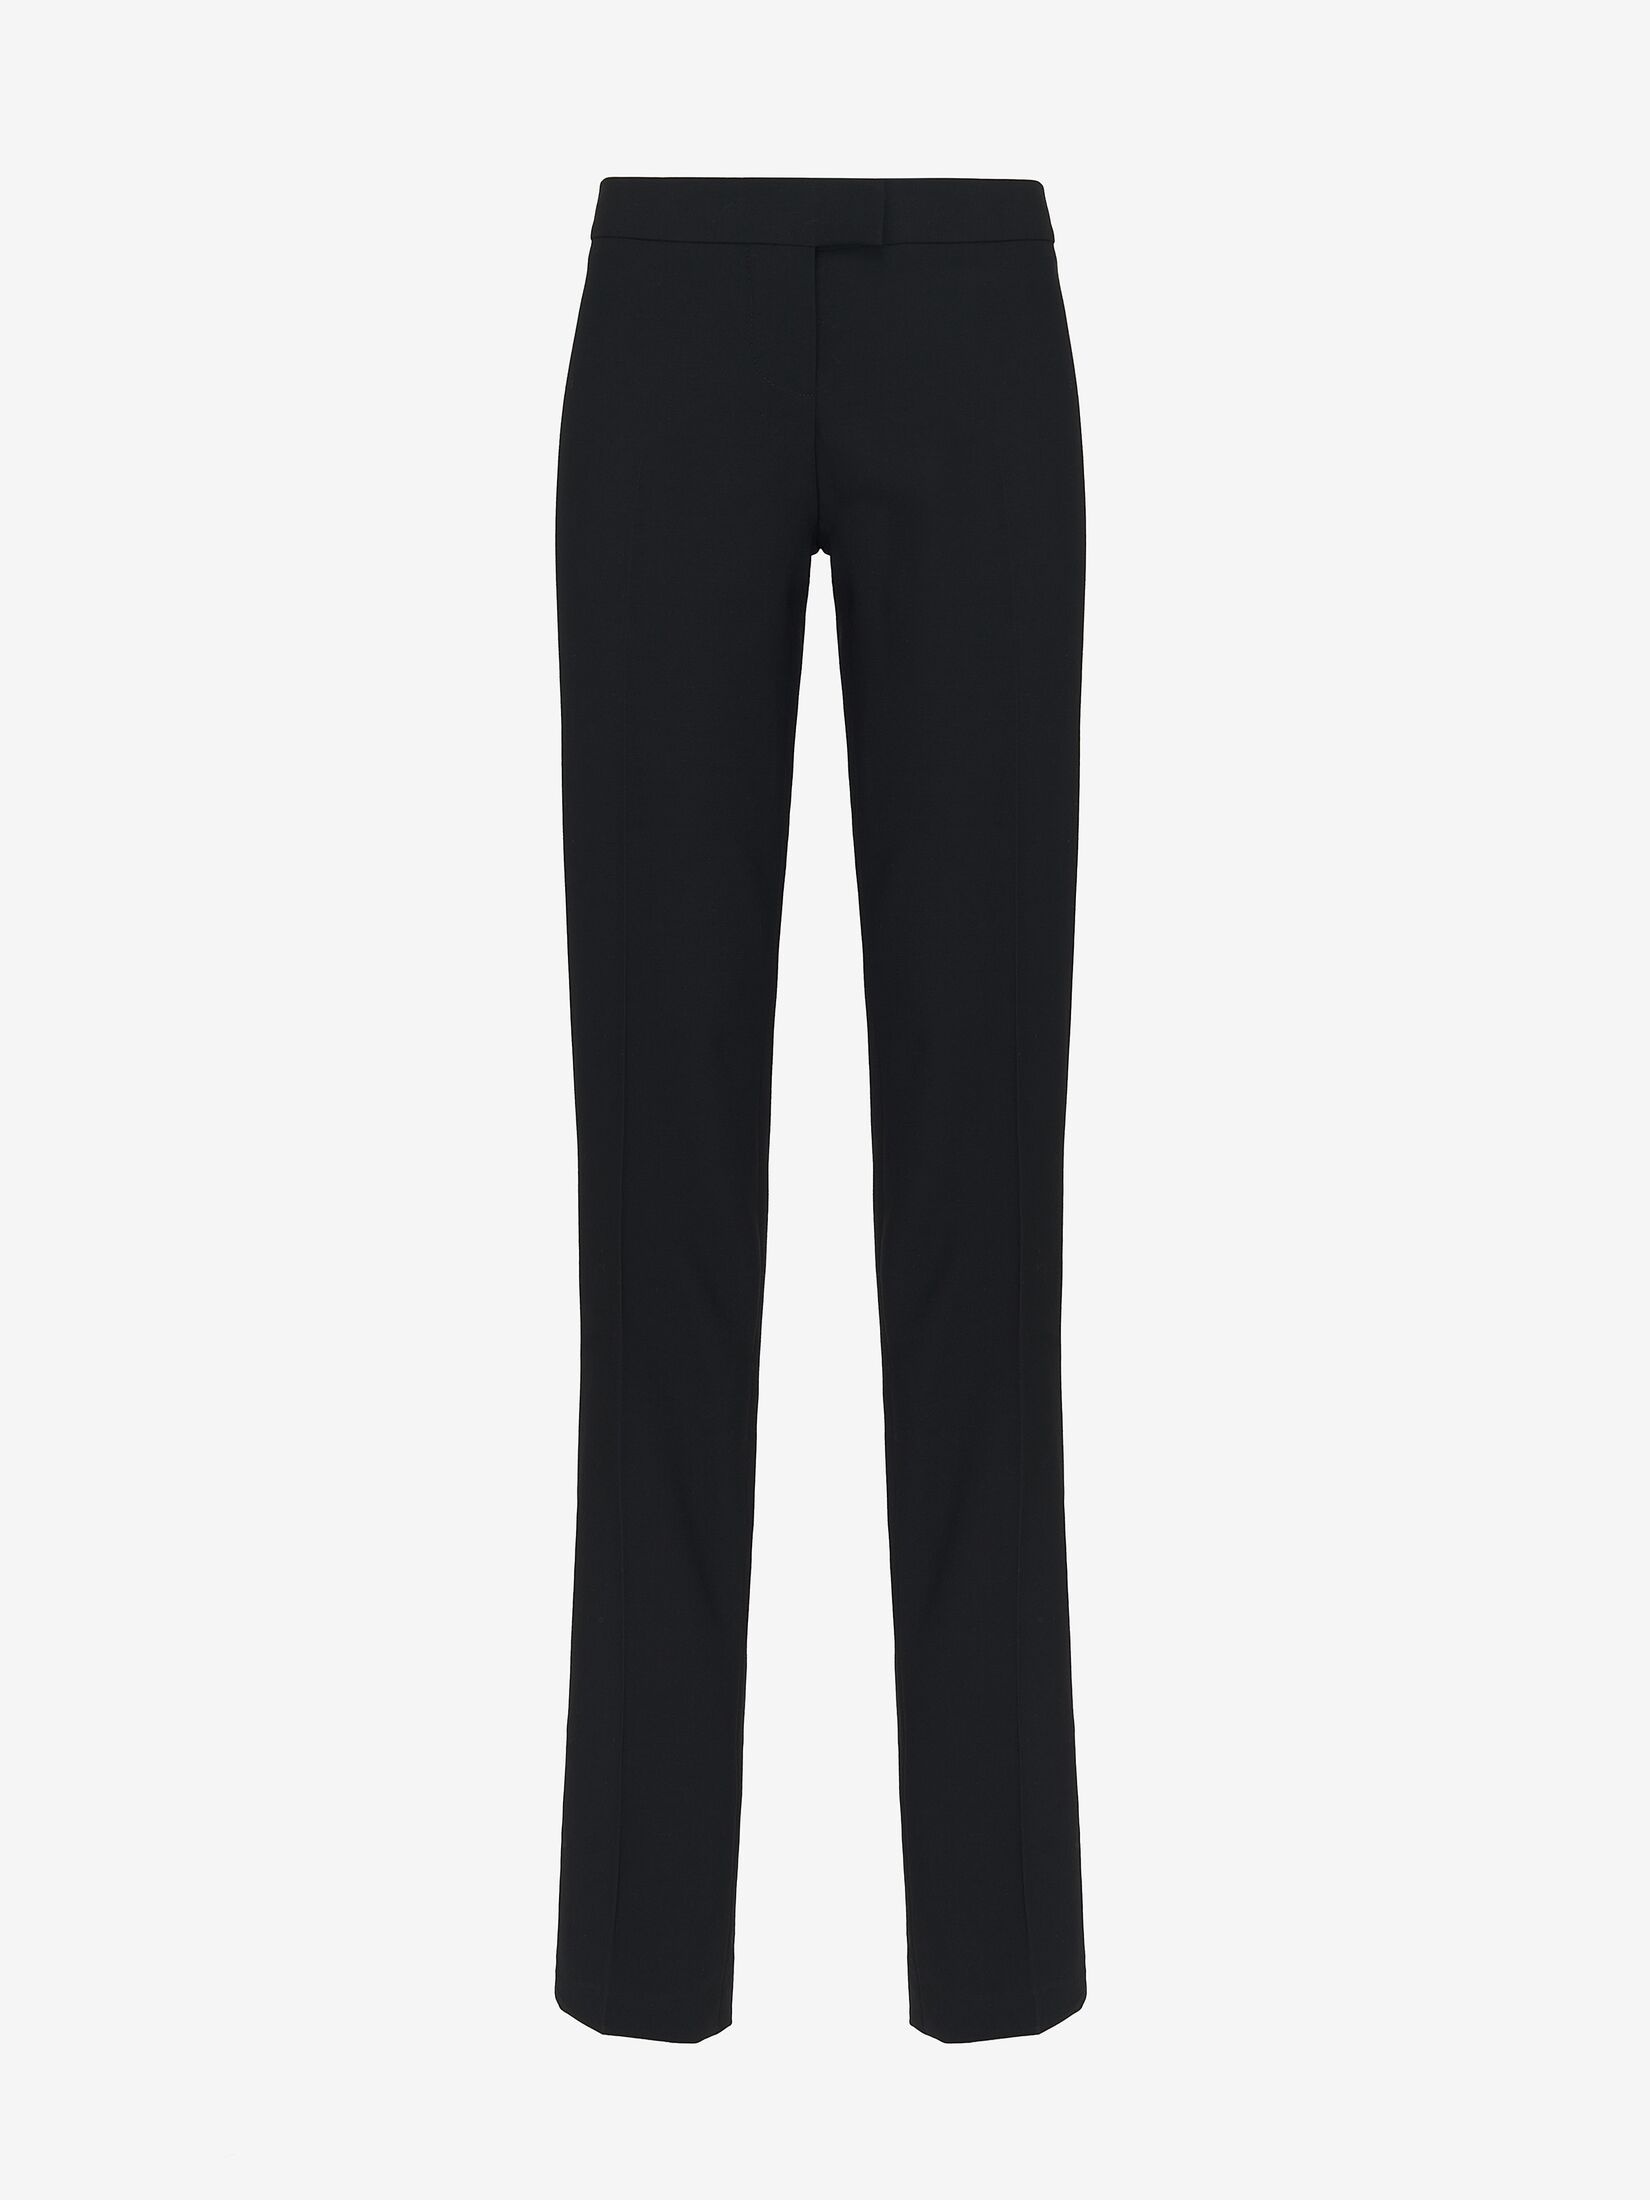 Women's Low-waisted Straight Leg Trousers in Black - 1